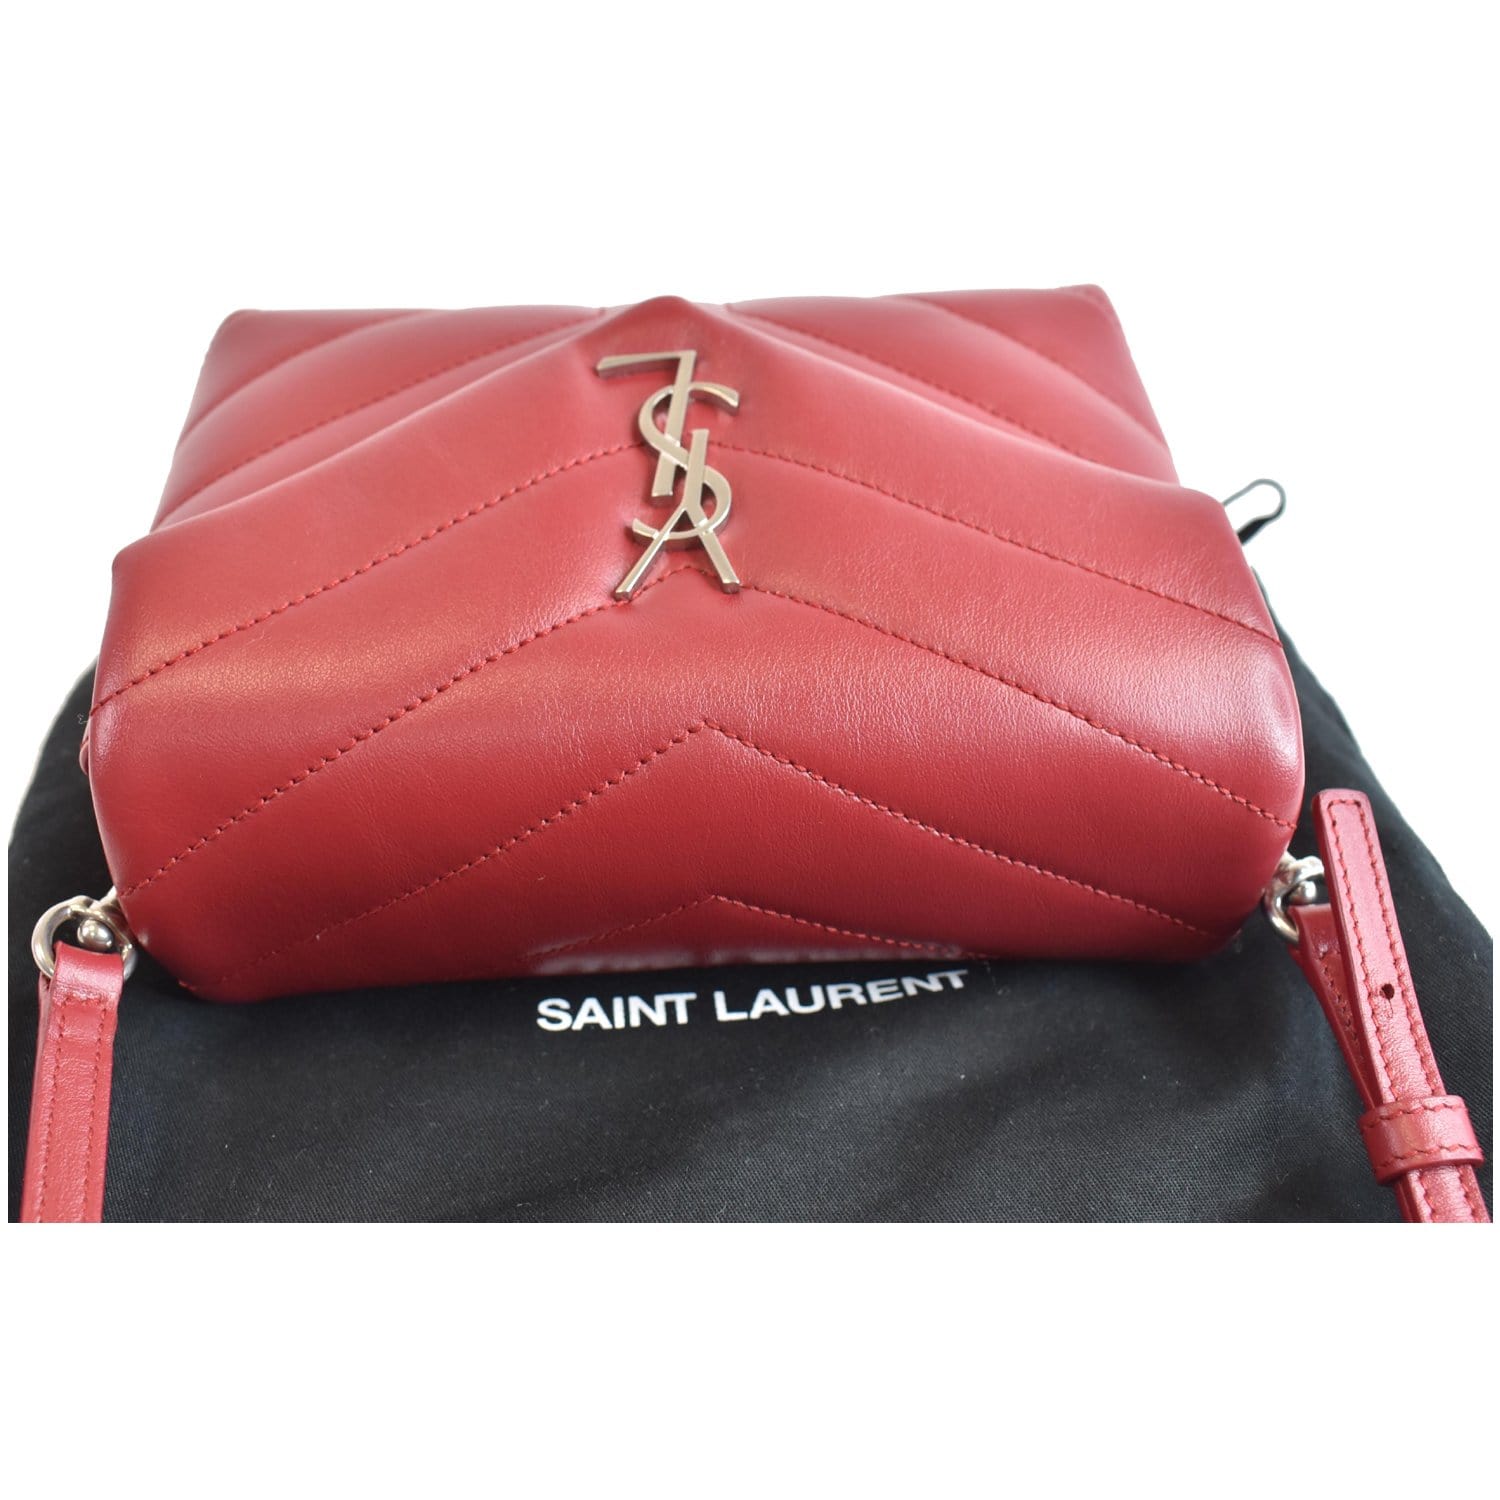 YSL LOULOU Toy Bag “Y” Matelasse Leather (Varied Colors)